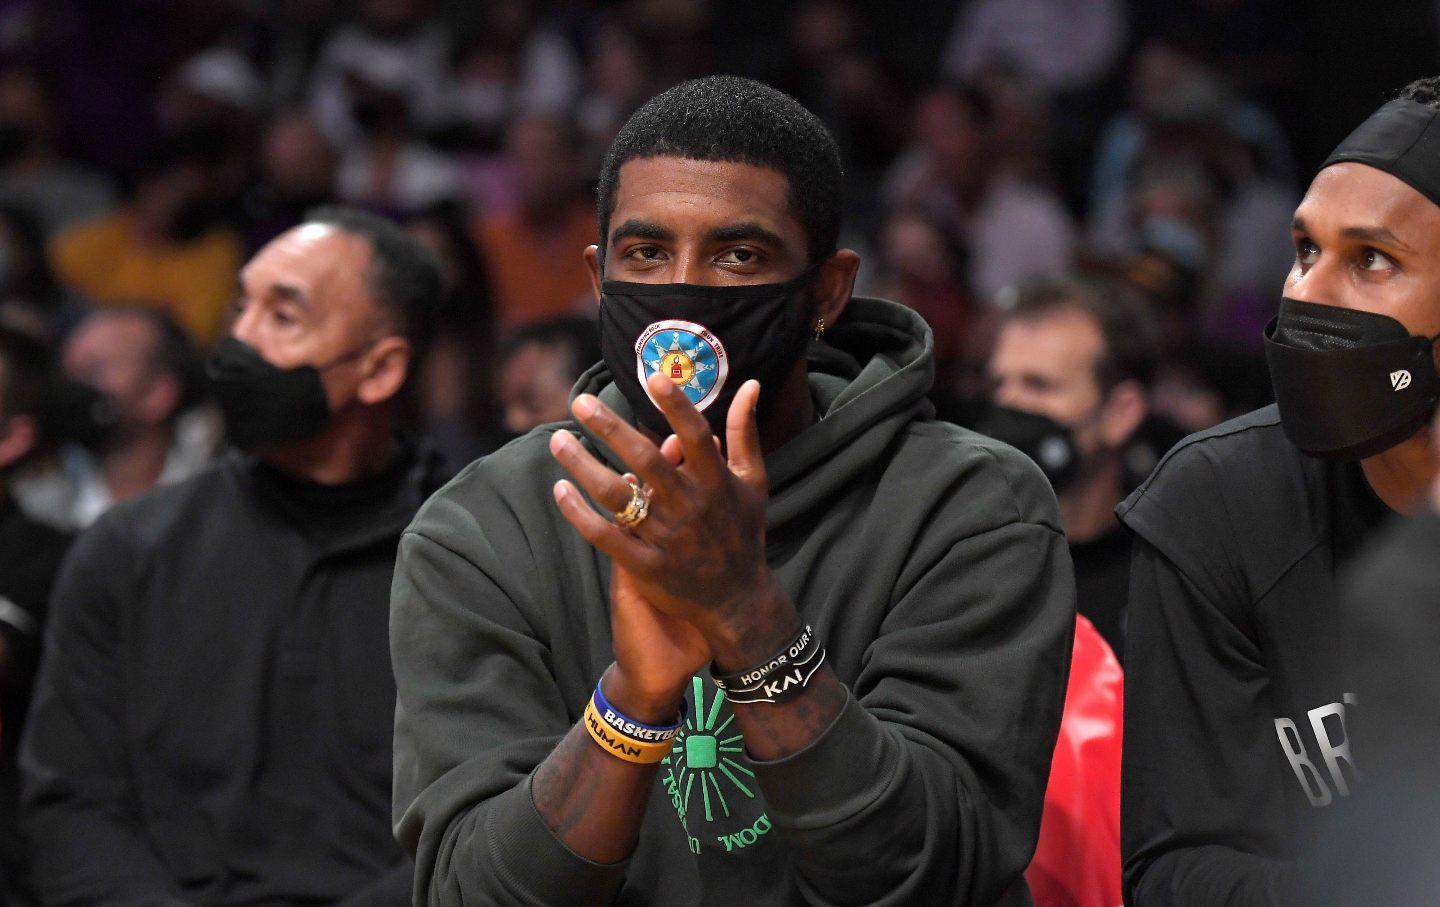 Brooklyn Nets basketball player Kyrie Irving claps looking into the camera at a pre-season game against the Los Angeles Lakers at Staplers Center in Los Angeles.